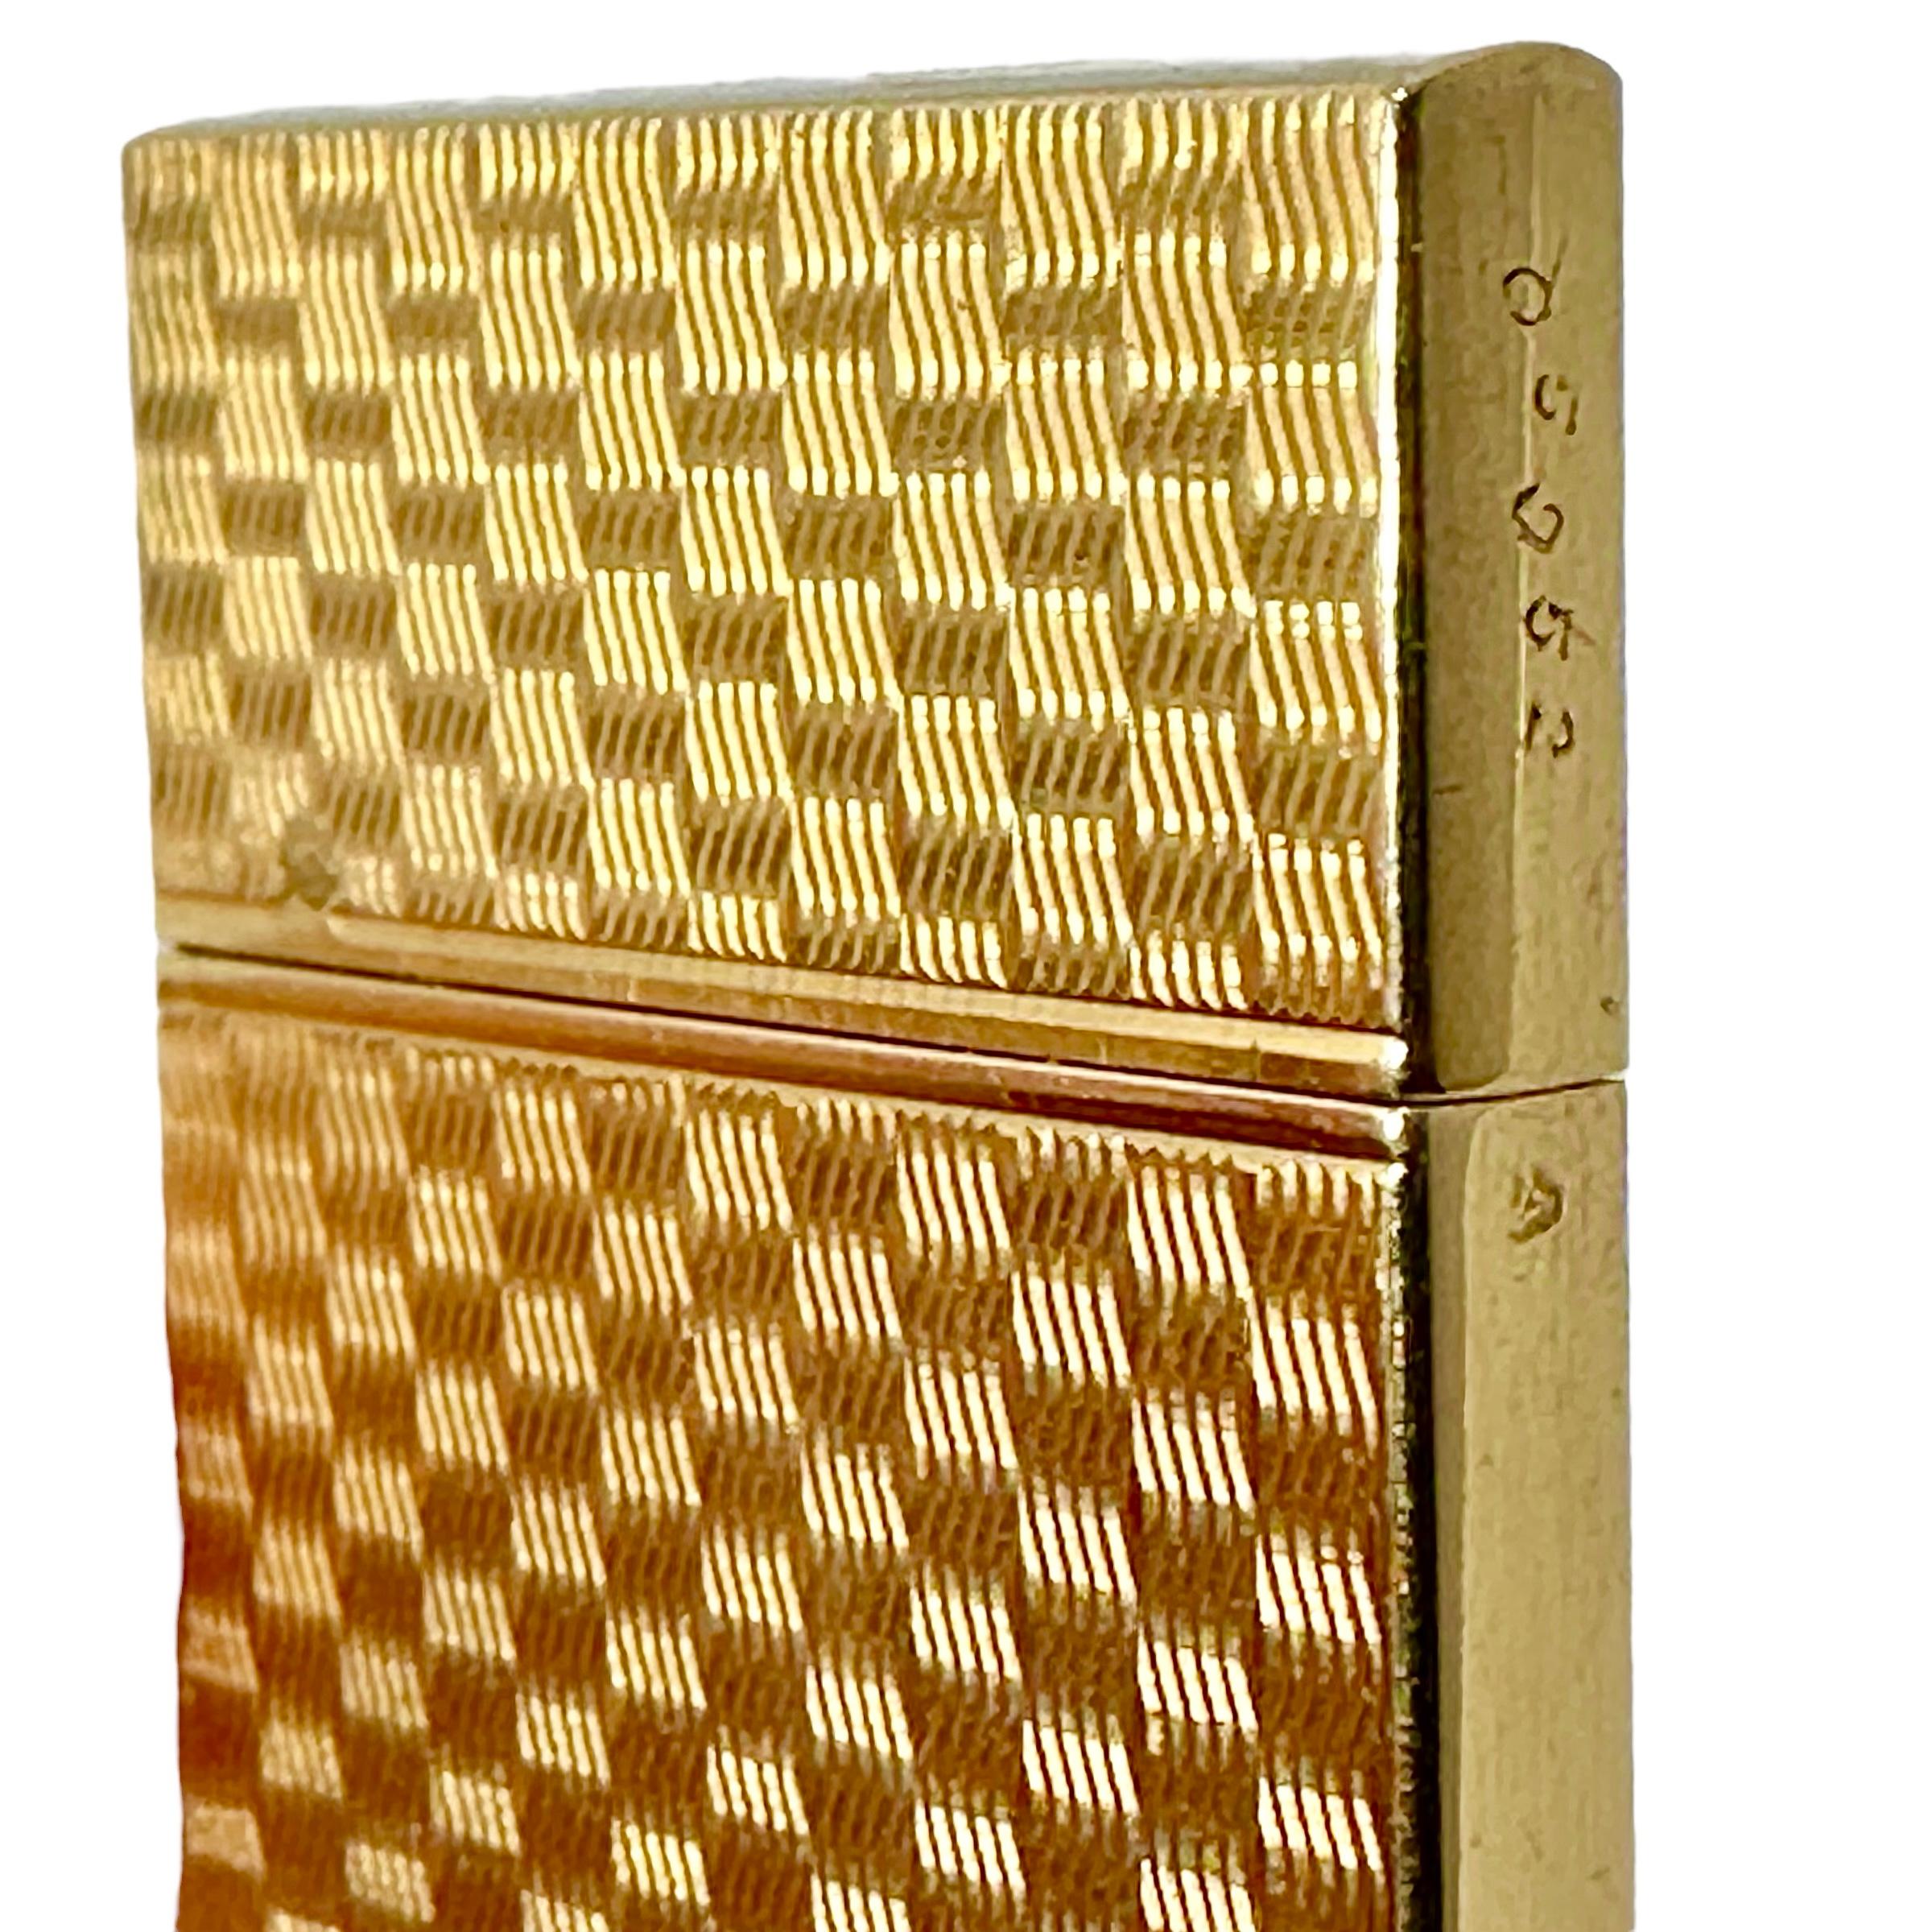 French Cartier Art-Deco Period Gold and Celulose Personal Comb 1